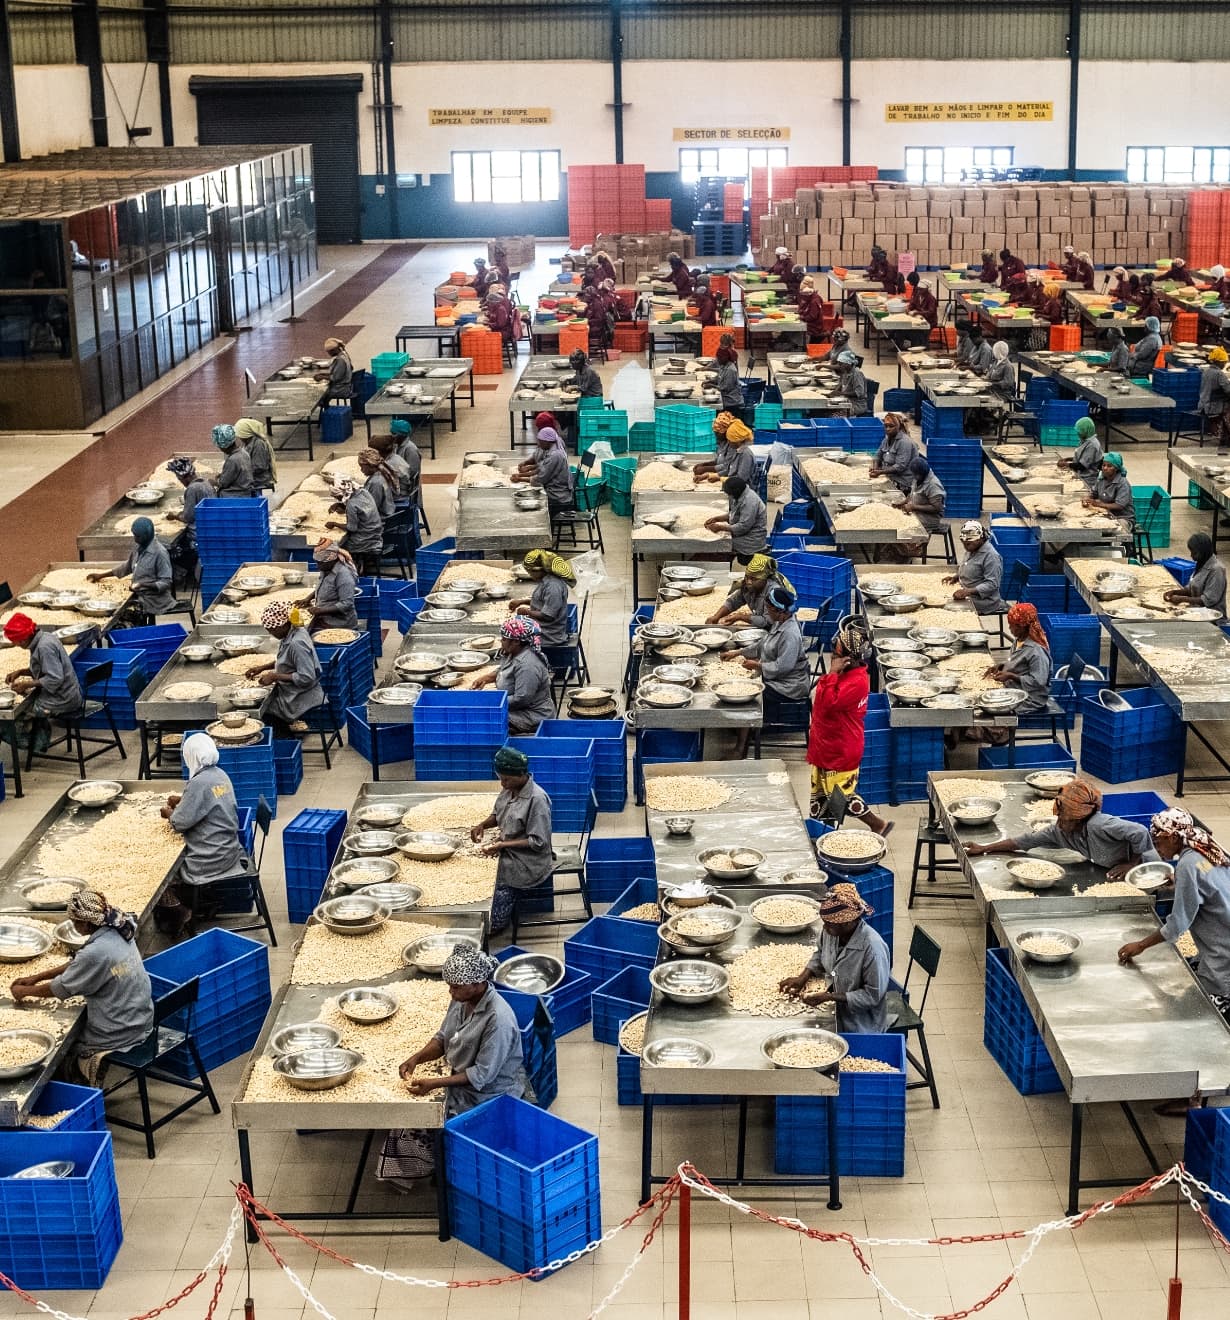 Inside the facility, with tables of workstations for cashew selection